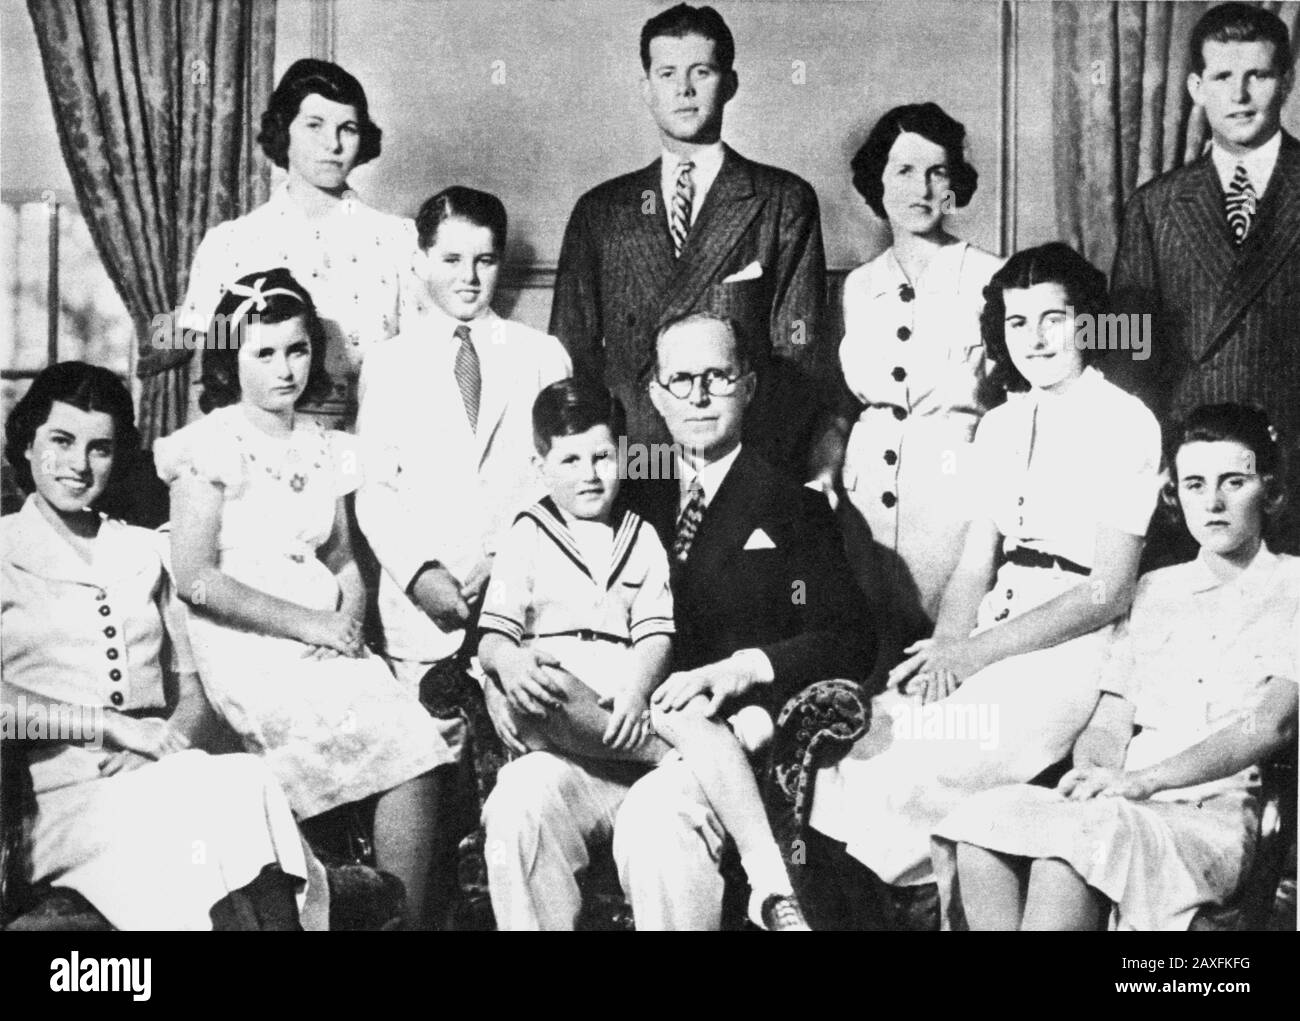 1943 ca , New York , USA : The american JOHN KENNEDY future president of US with all the family. From the left: EUNICE and Jean seated , ROBERT with white dress , EDWARD seated on his father JOSEPH , PATRICIA and KATHLEEN  . Standing from left : ROSEMARY , JOHN , the mother ROSE and JOSEPH Jr  - PRESIDENTE DEGLI STATI UNITI D' AMERICA - cravatta  - tie - CASA BIANCA - WHITE HOUSE - POLITICO - POLITIC - POLITICIAN - POLITICA  - ARCHIVIO GBB © Archivio GBB / Stock Photo